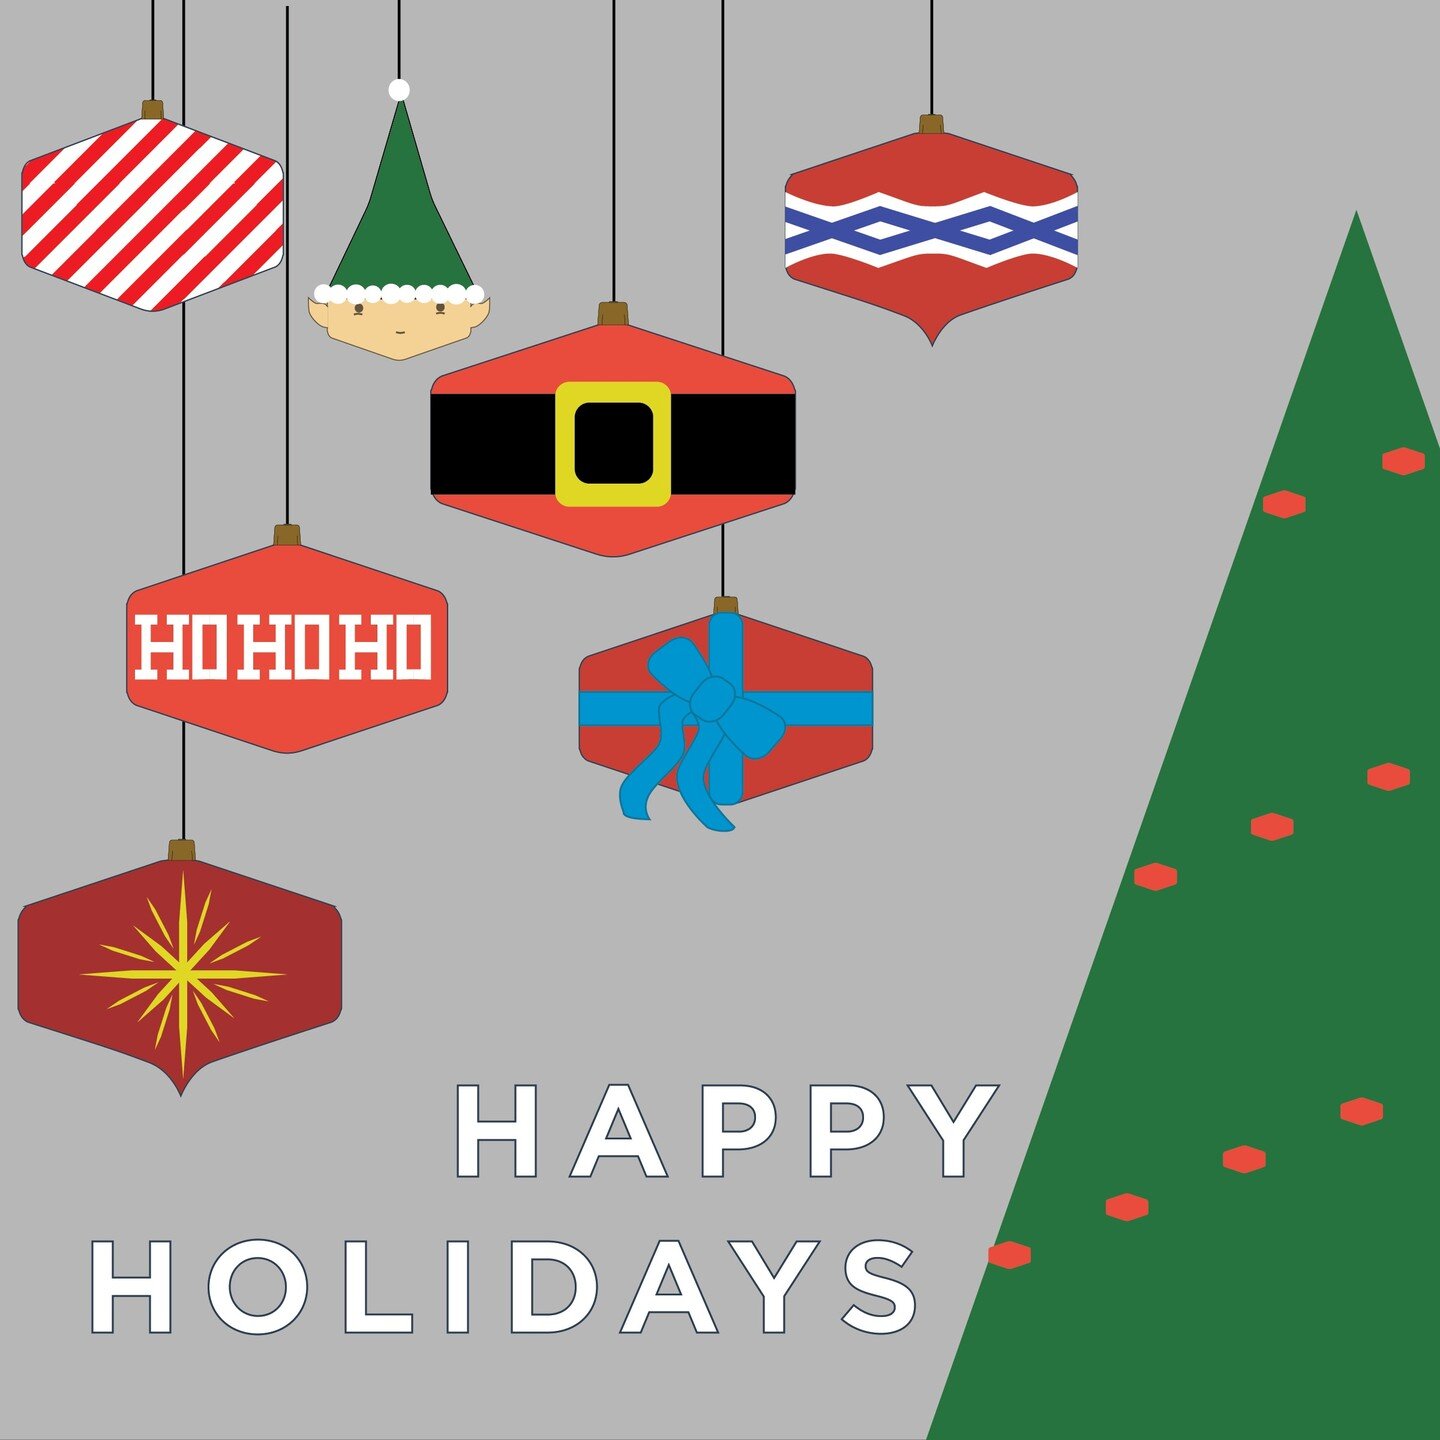 Happy holidays from everyone at HIVE!

#HIVEdesign #happyholidays #design #kansascity #architecture #collaborate